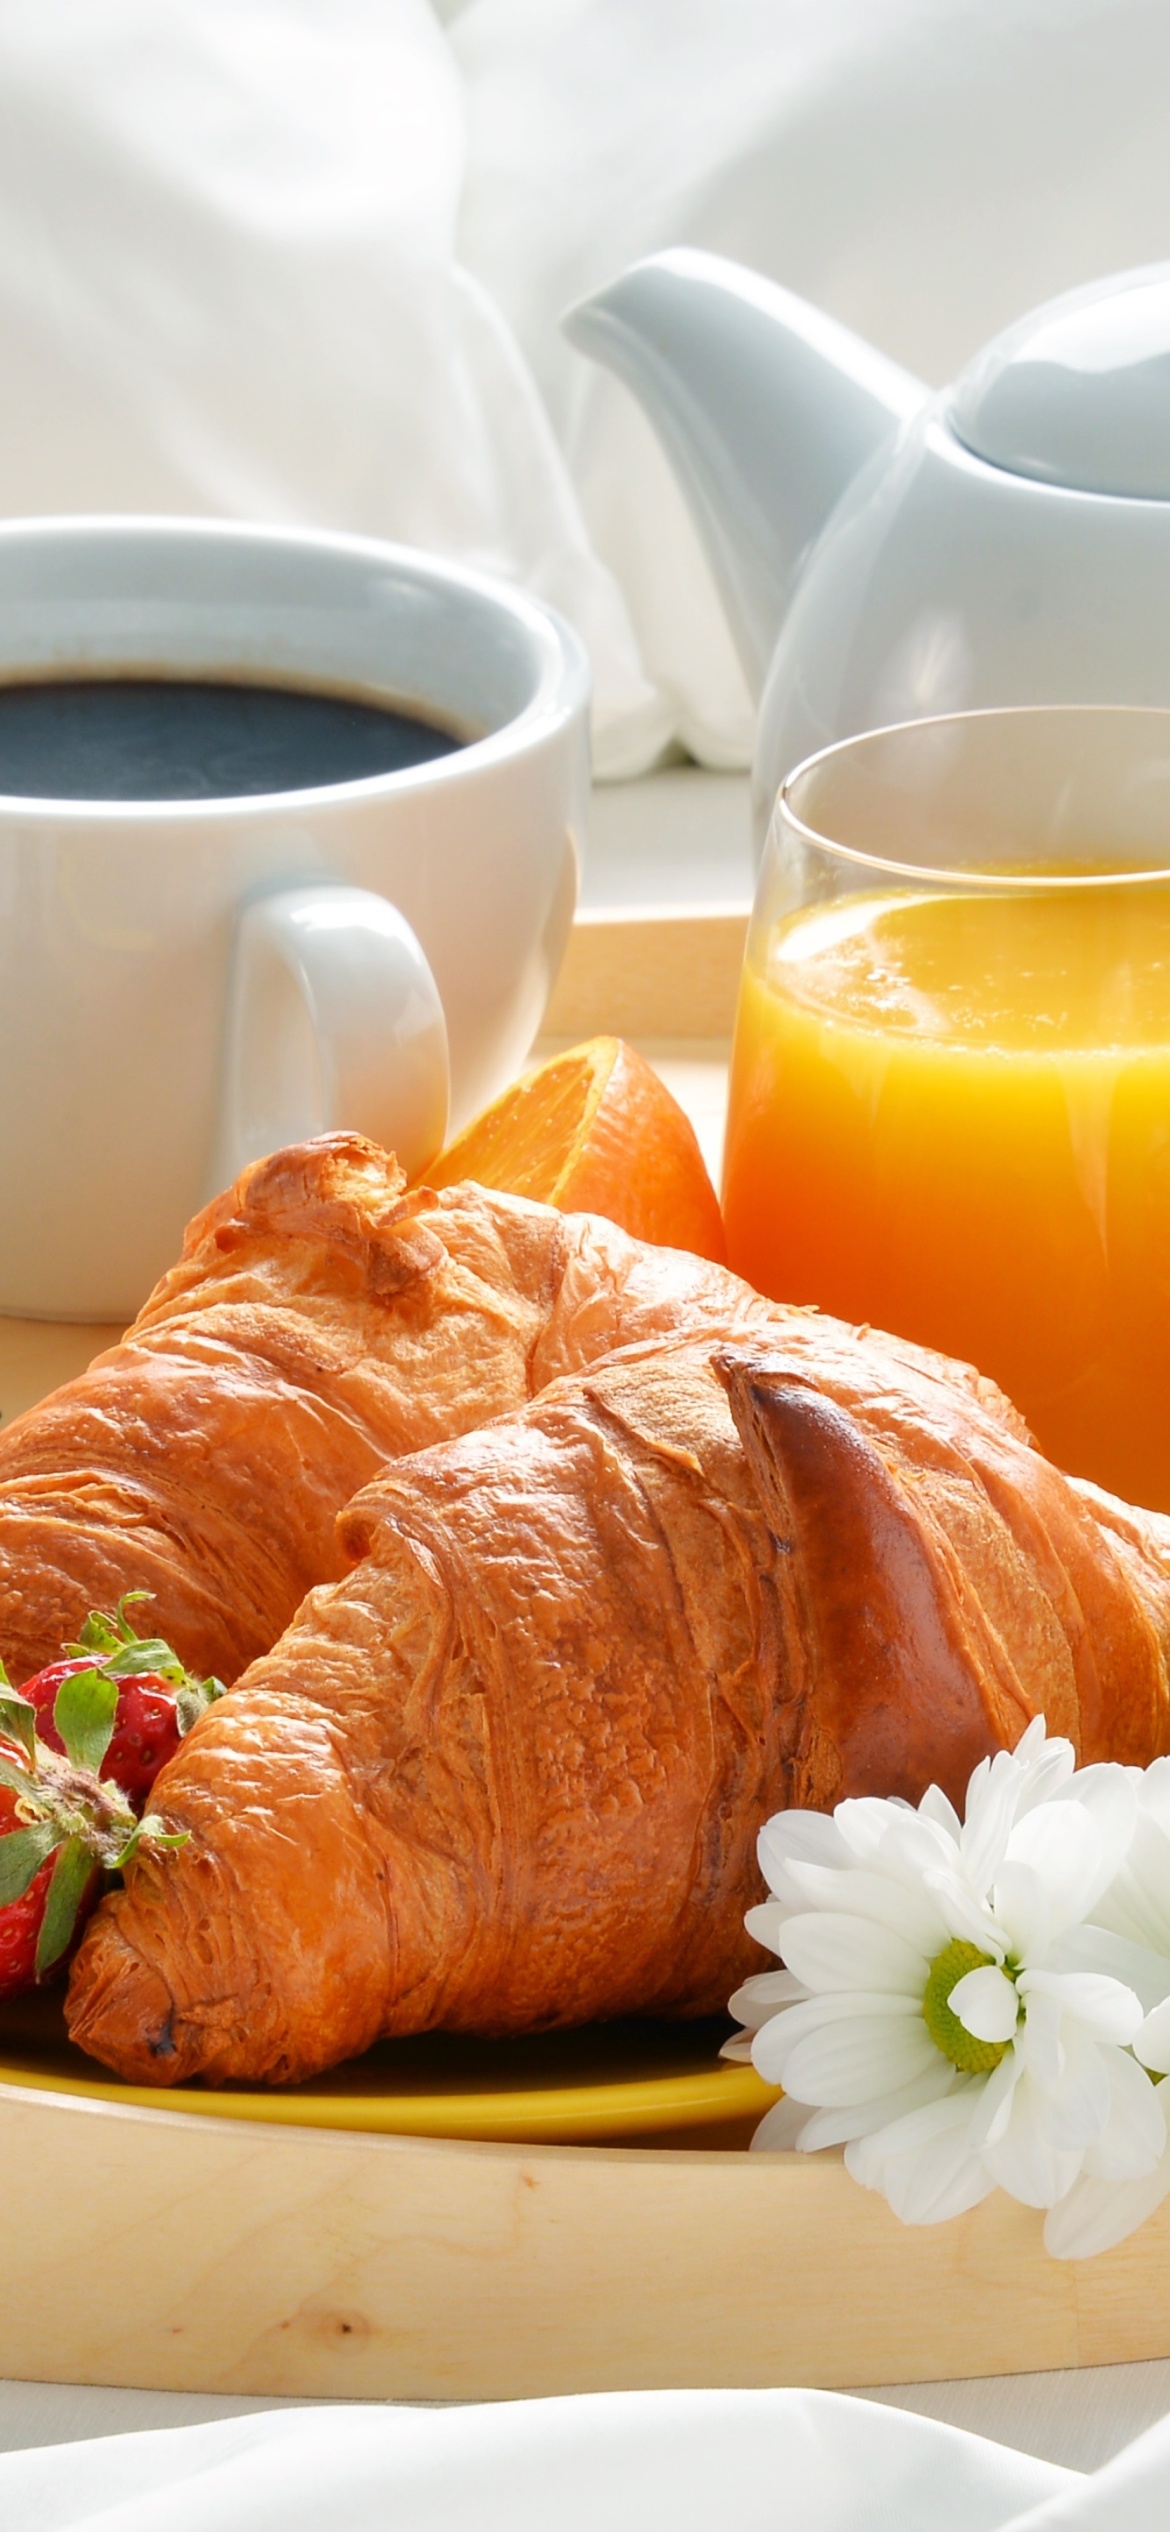 Breakfast with croissant and musli wallpaper 1170x2532